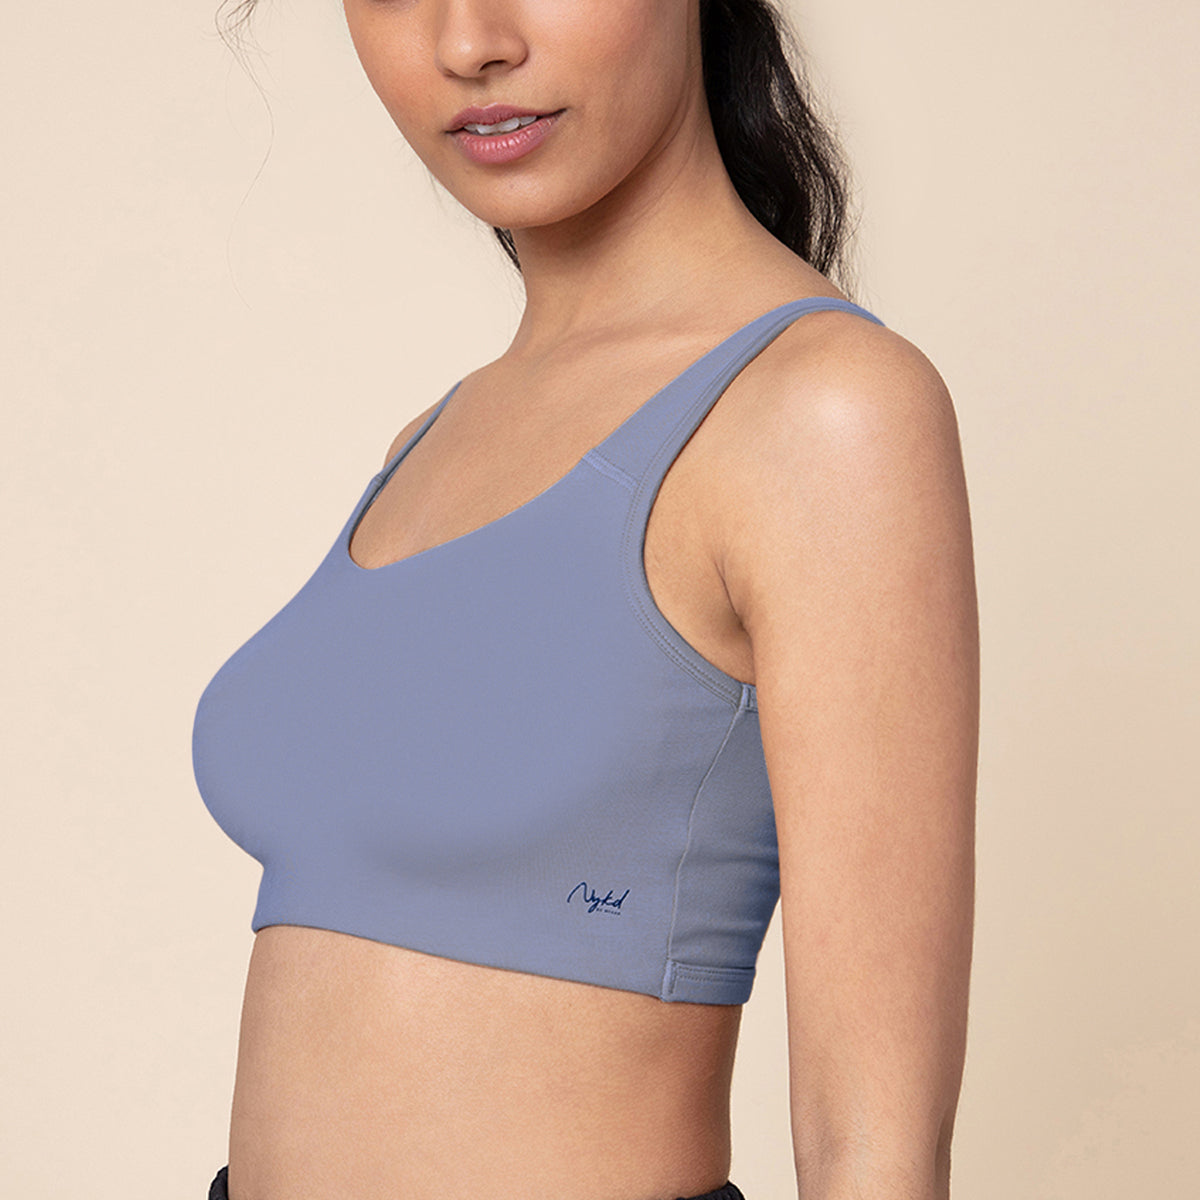 Soft cup easy-peasy slip-on bra with Full coverage - Blue NYB113